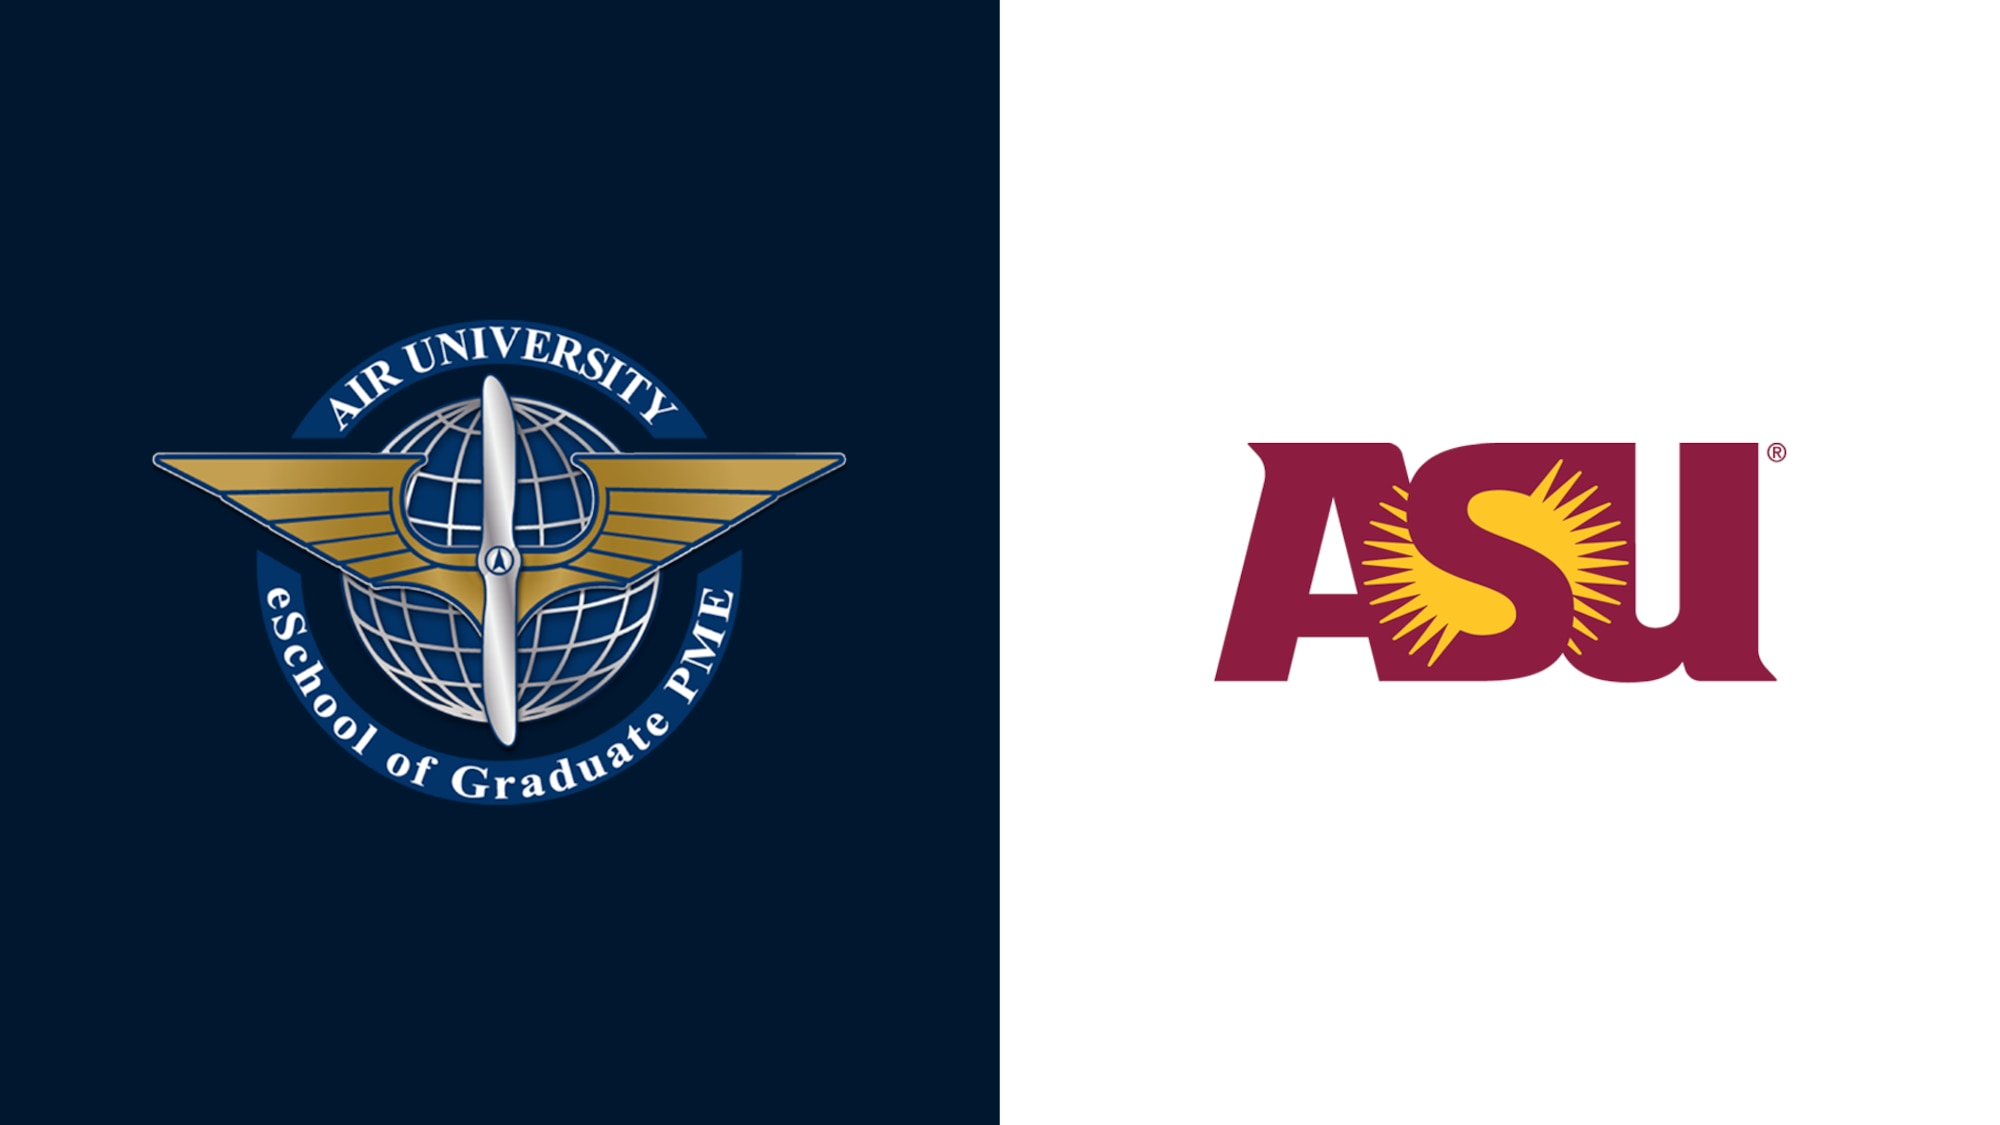 Air University partnered with Arizona State University, one of America’s leading public research universities with advanced learning and support systems, to transform the distance learning experience for Air Force officers and civilians worldwide. This is the first time a U.S. military service utilized a civilian university partner to enable the delivery of officer PME.